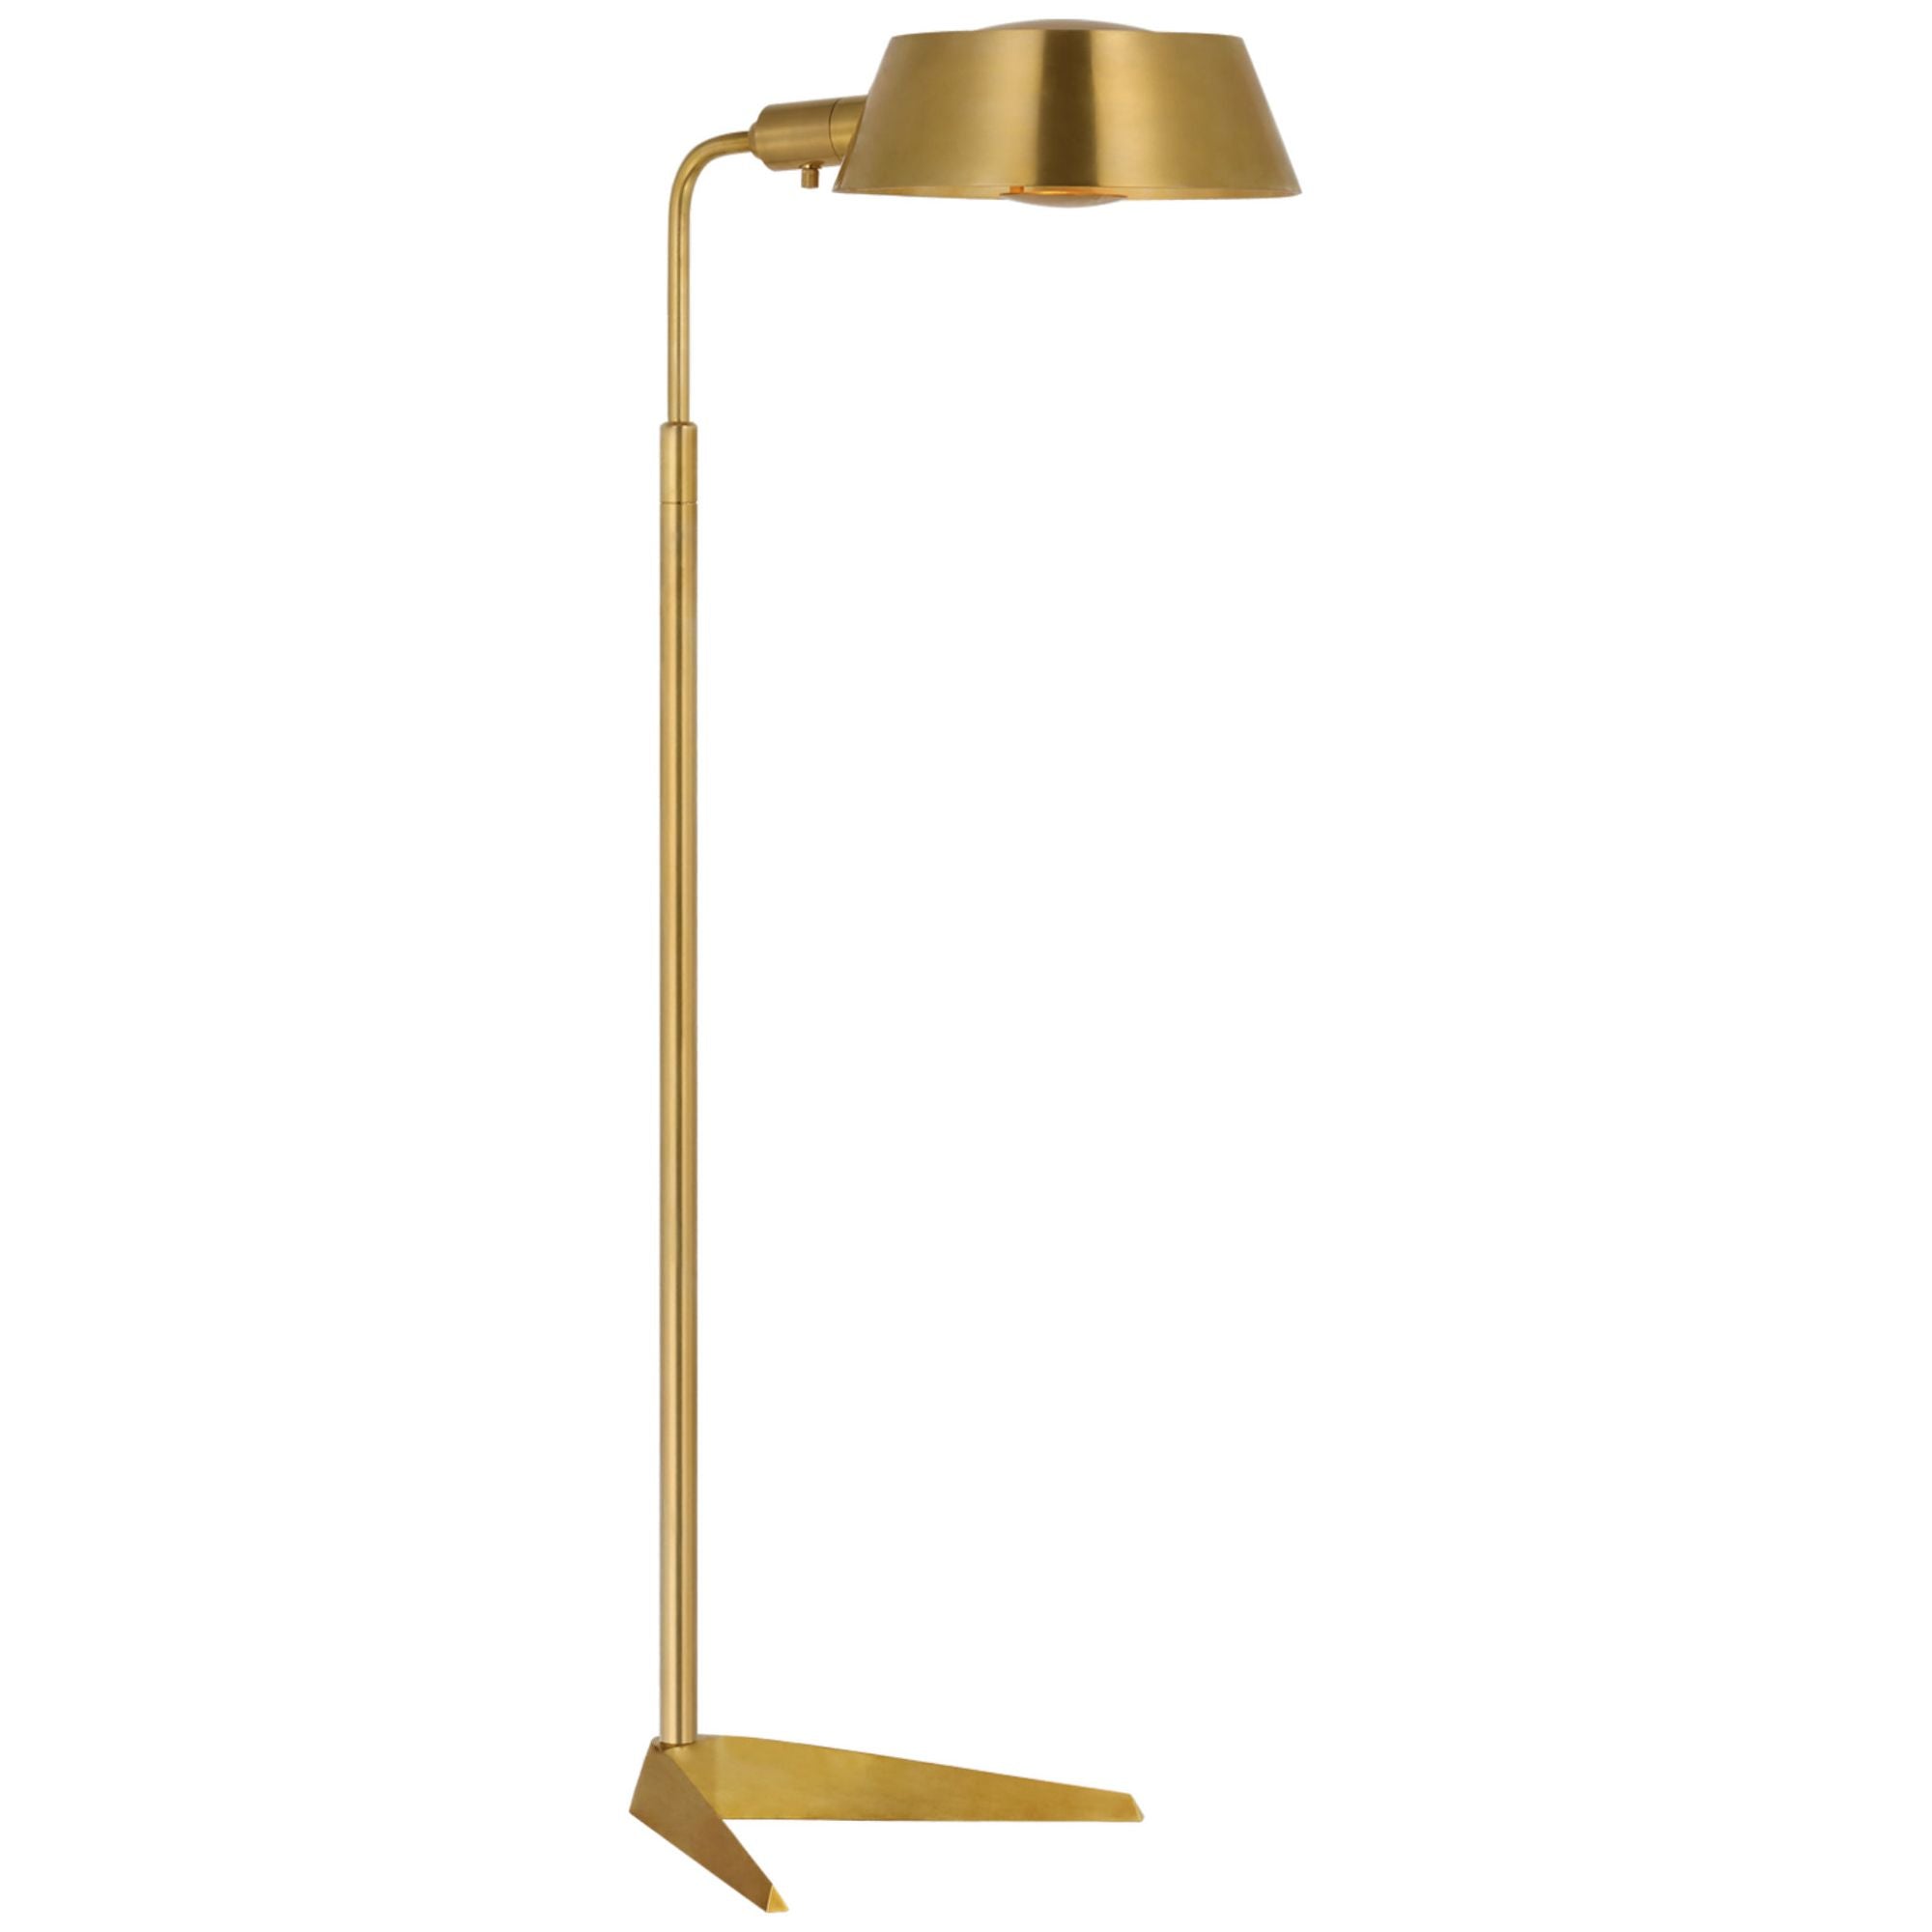 Thomas O'Brien Alfie Pharmacy Floor Lamp in Hand-Rubbed Antique Brass